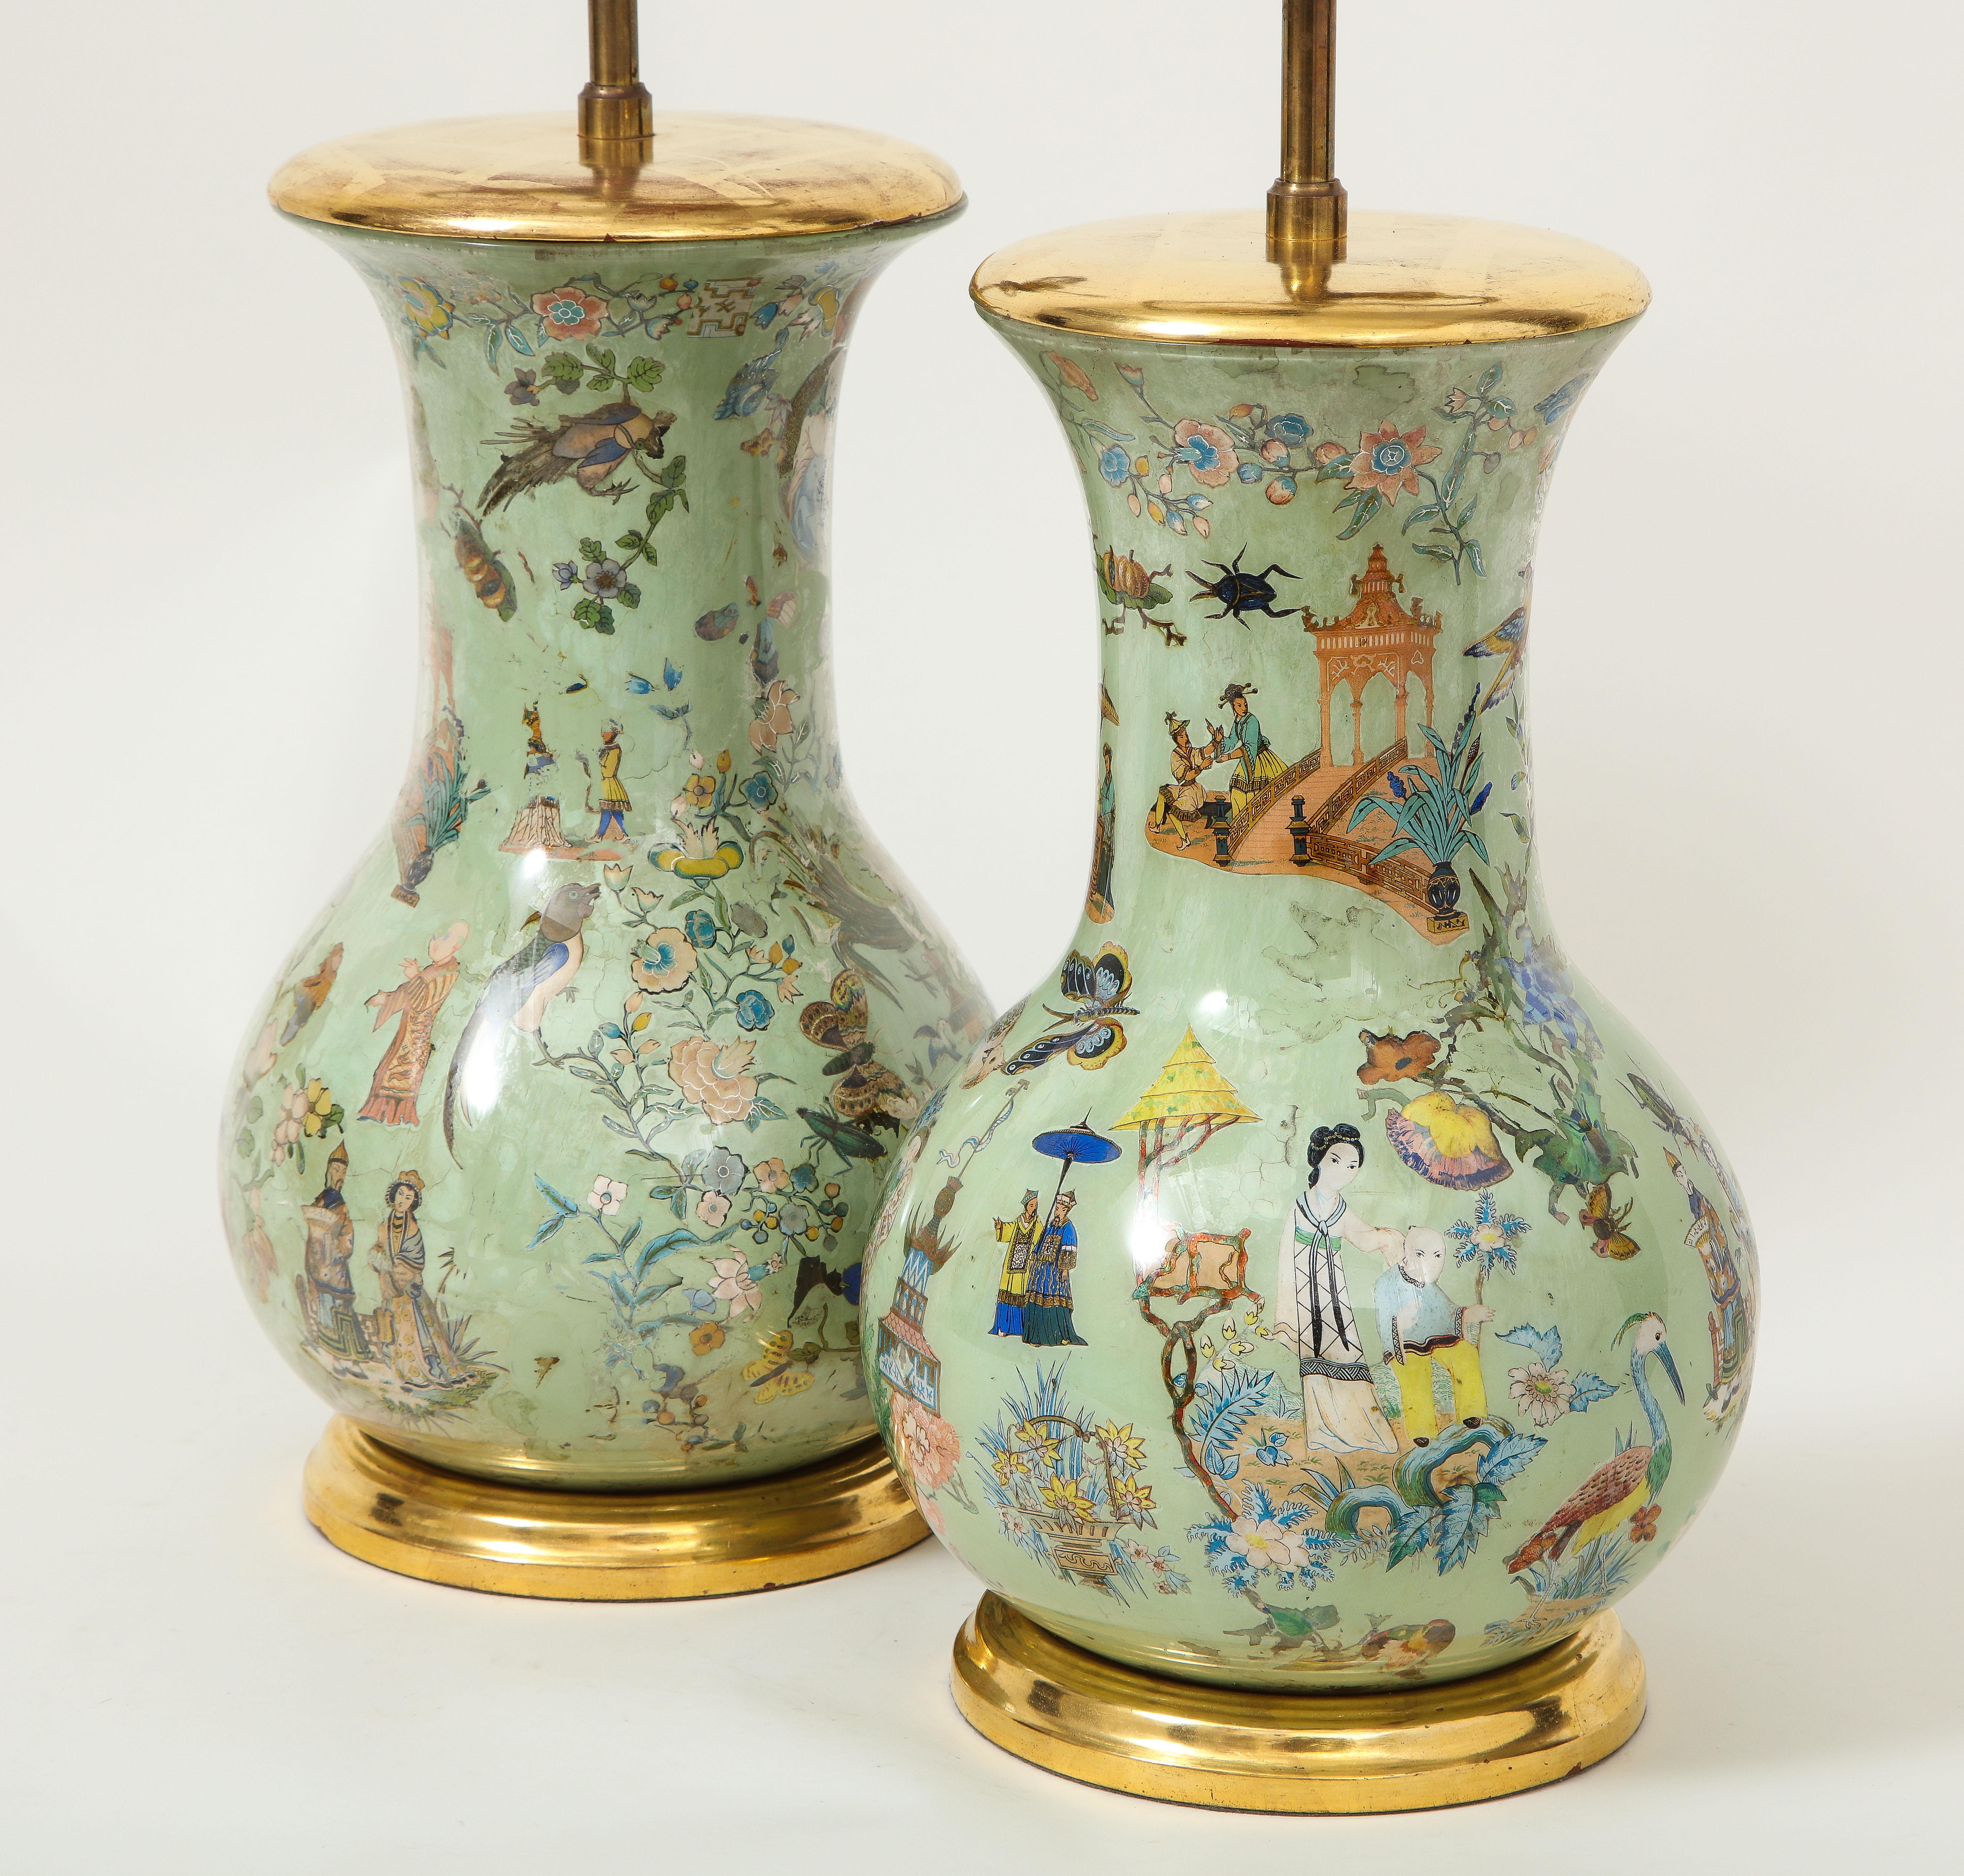 Each of baluster form, featuring fanciful chinoiserie decoration including mandarin figures, pagodas, and various birds and floral blossoms; mounted on a turned giltwood base; fitted with an adjustable brass rod and two bulb sockets. Height to top